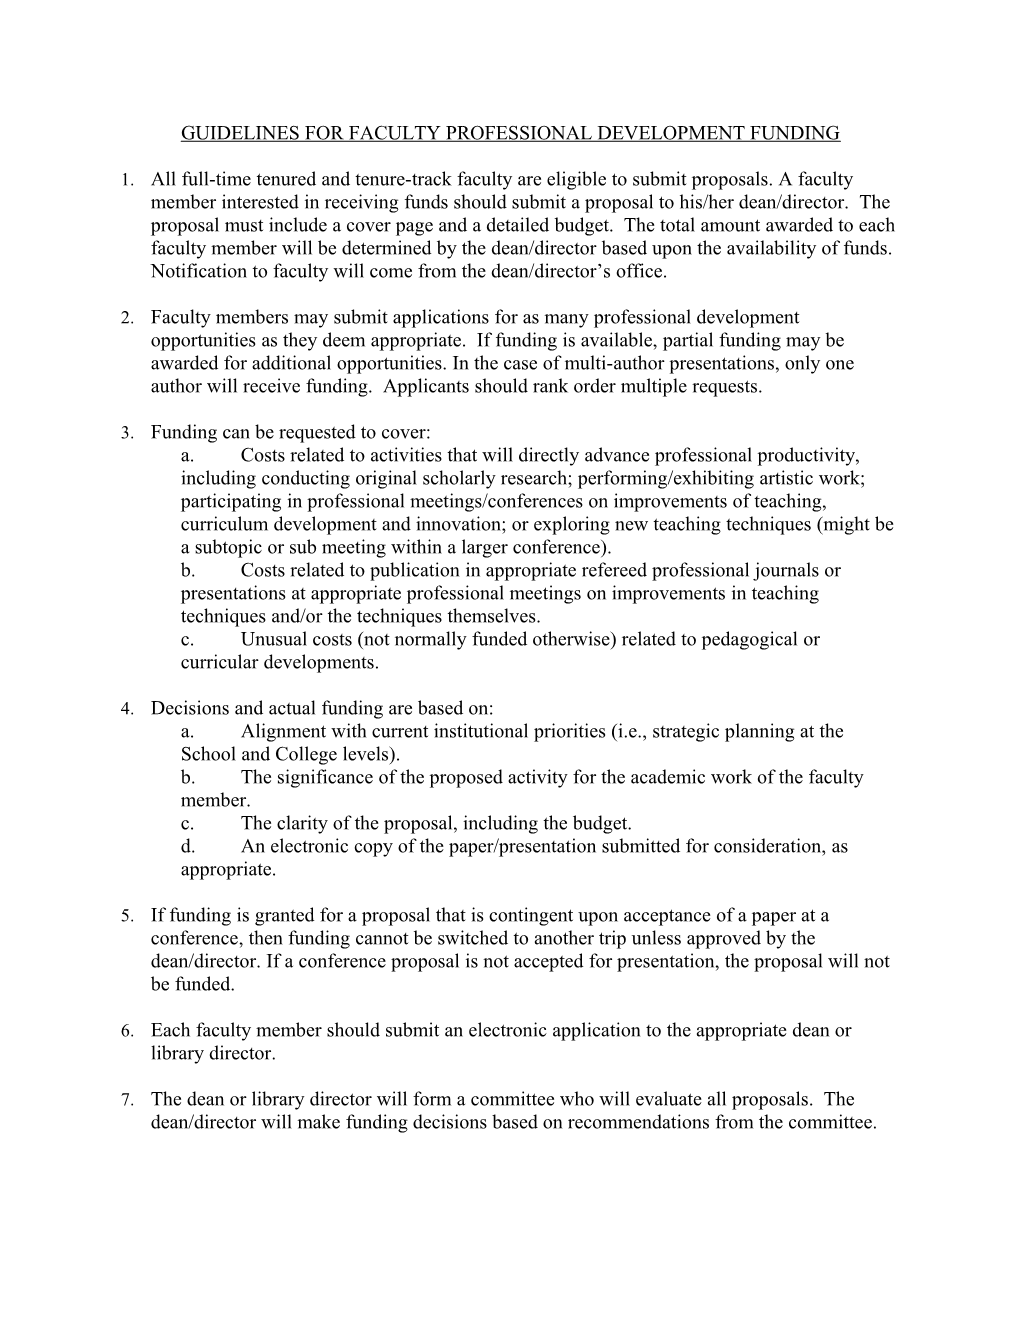 Guidelines for Faculty Professional Development Funding